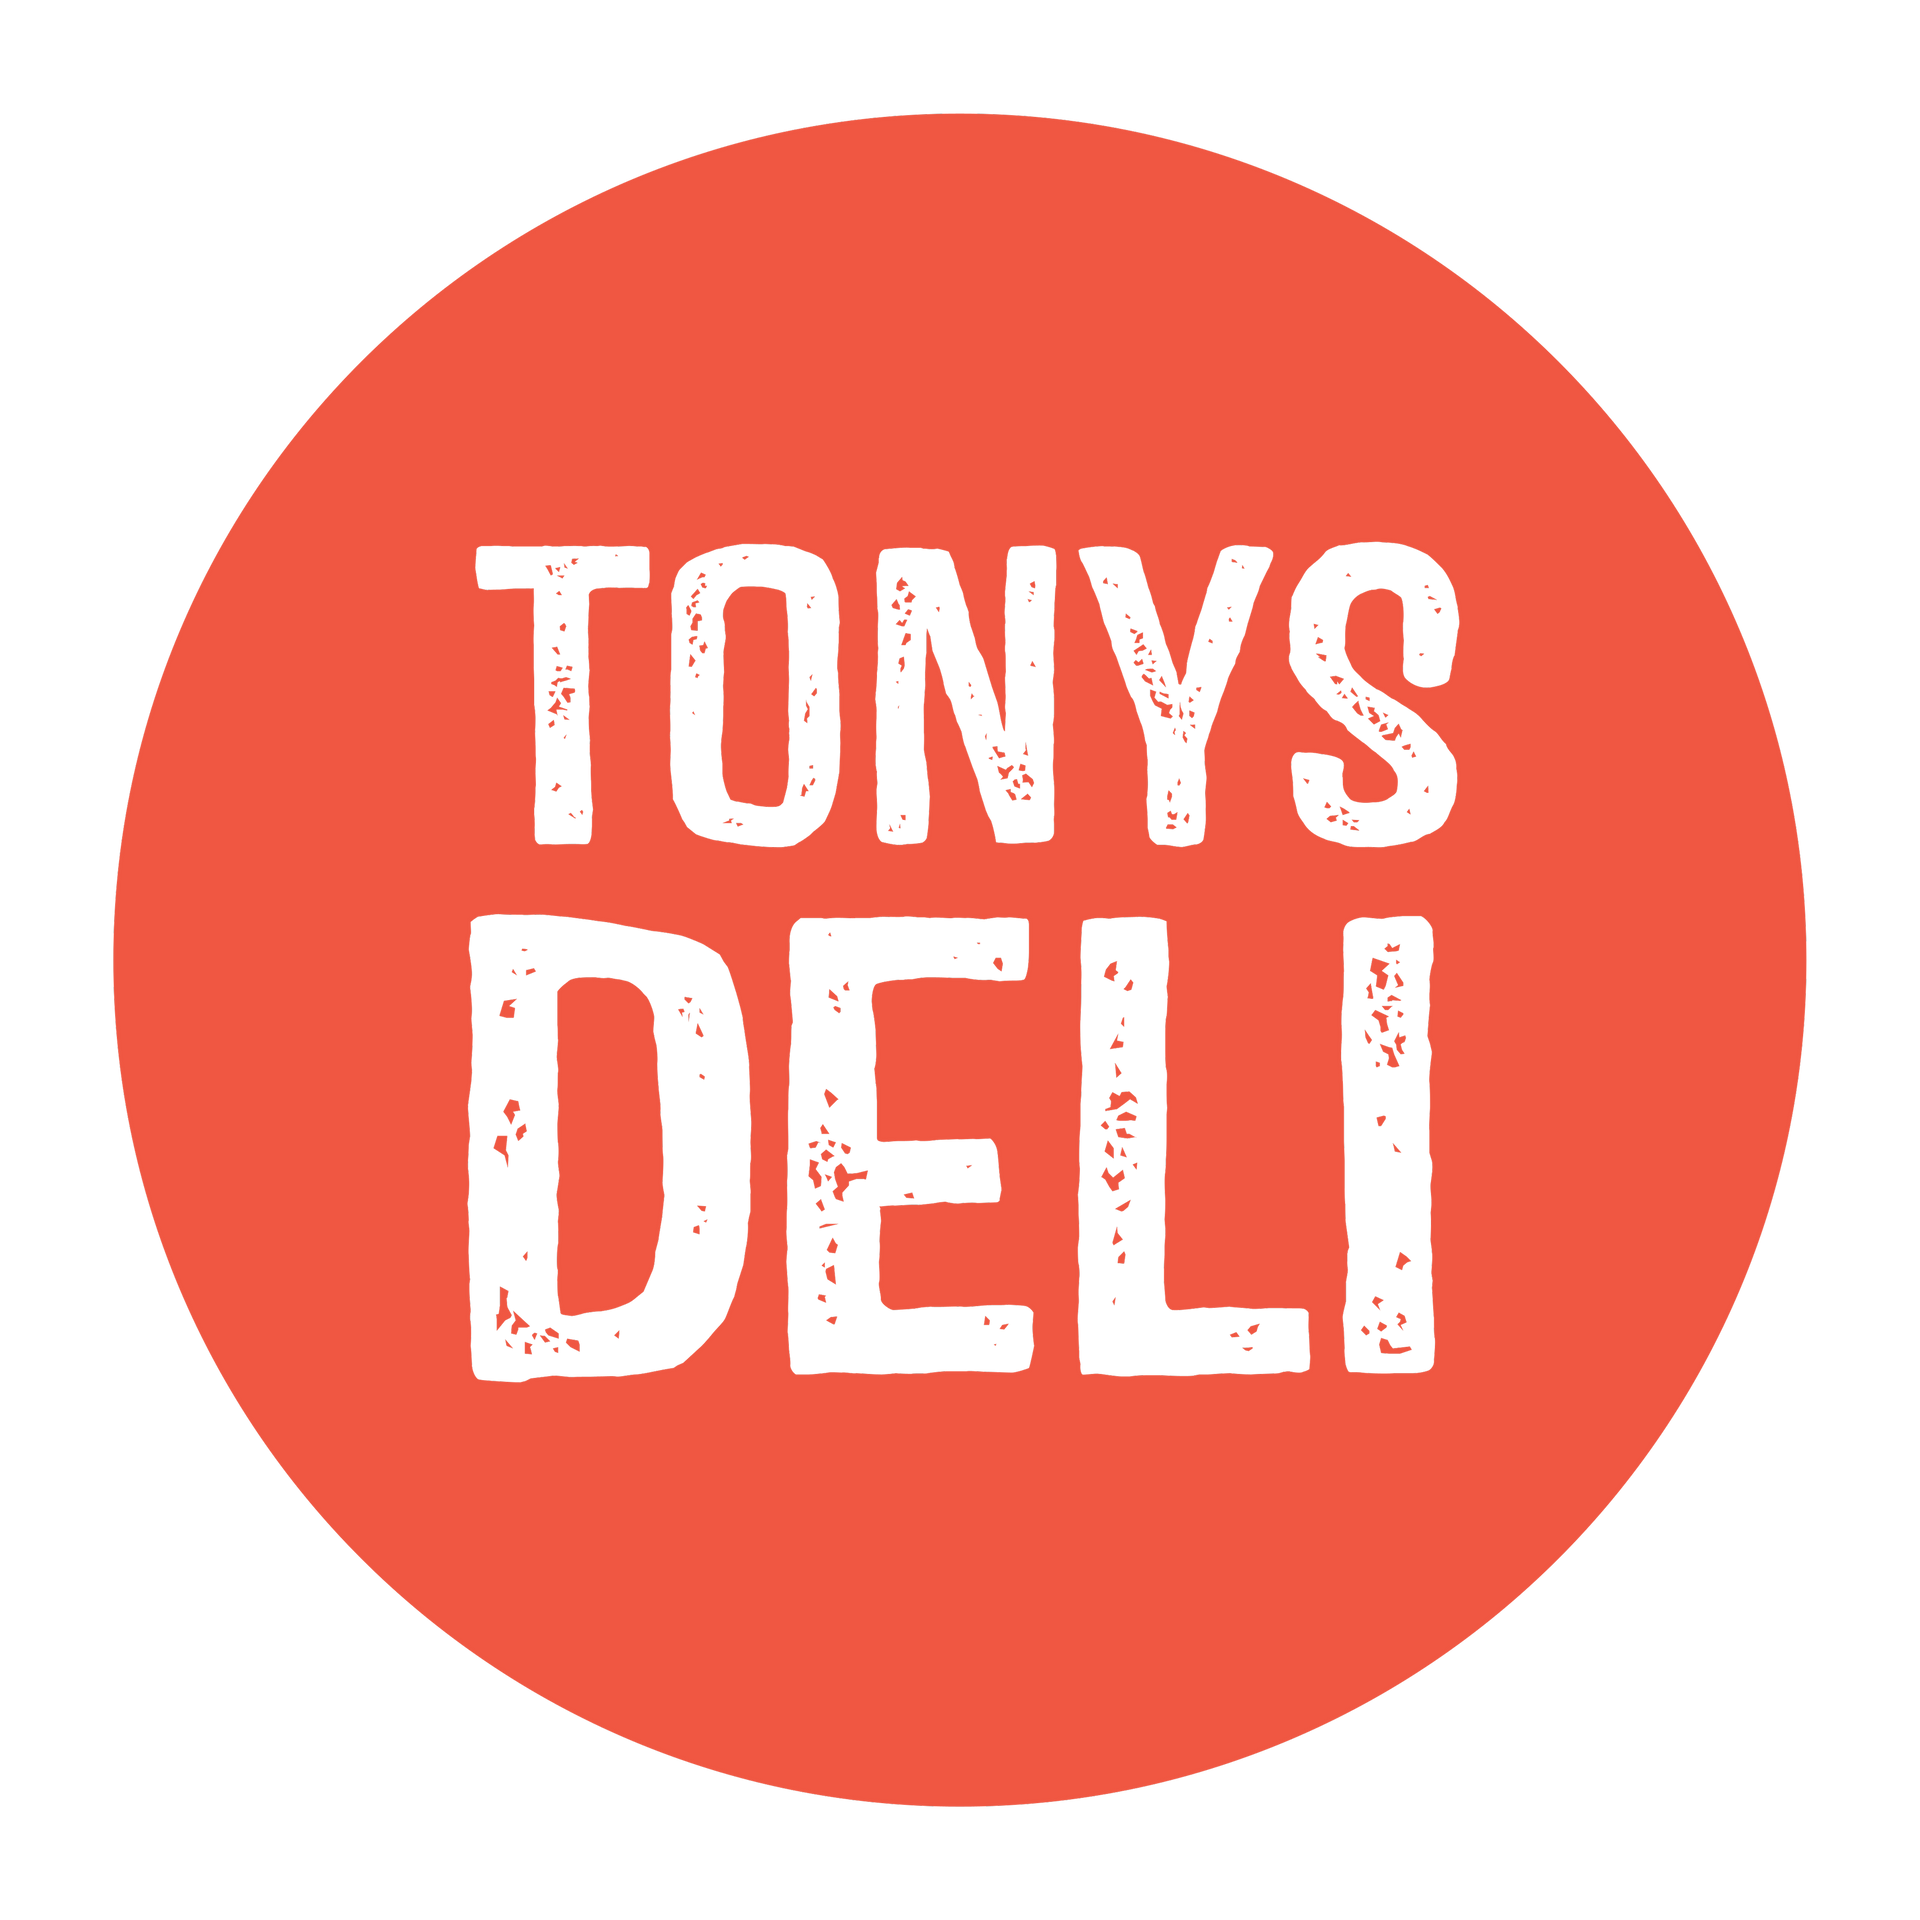 A red circle with the Tony 's Deli logo.